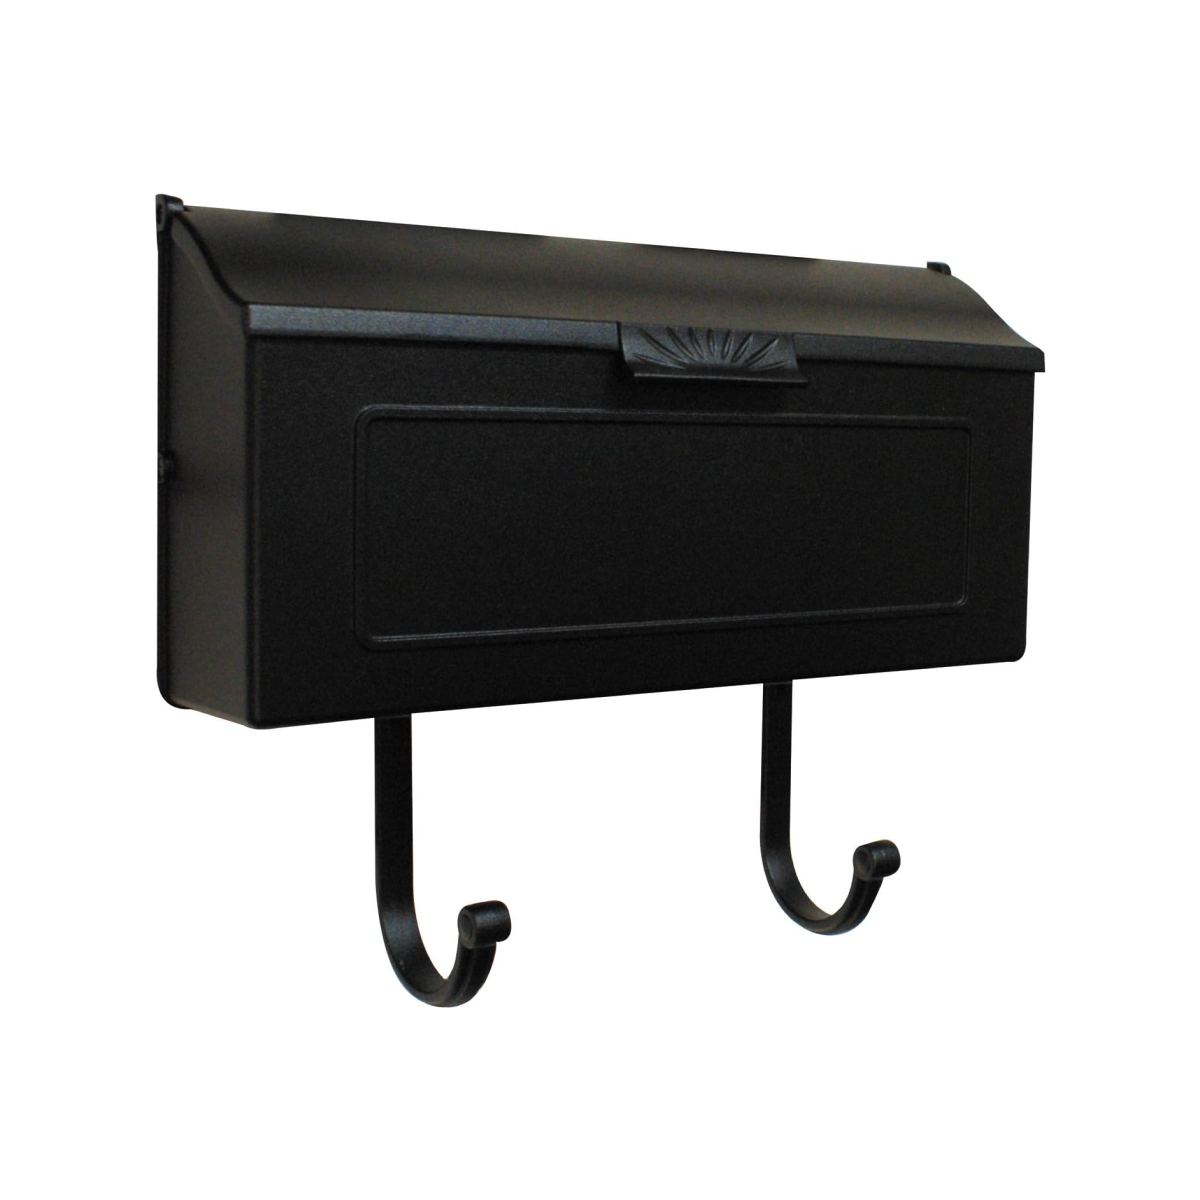 Horizon Wall Mount Mailbox for Sale Product Image